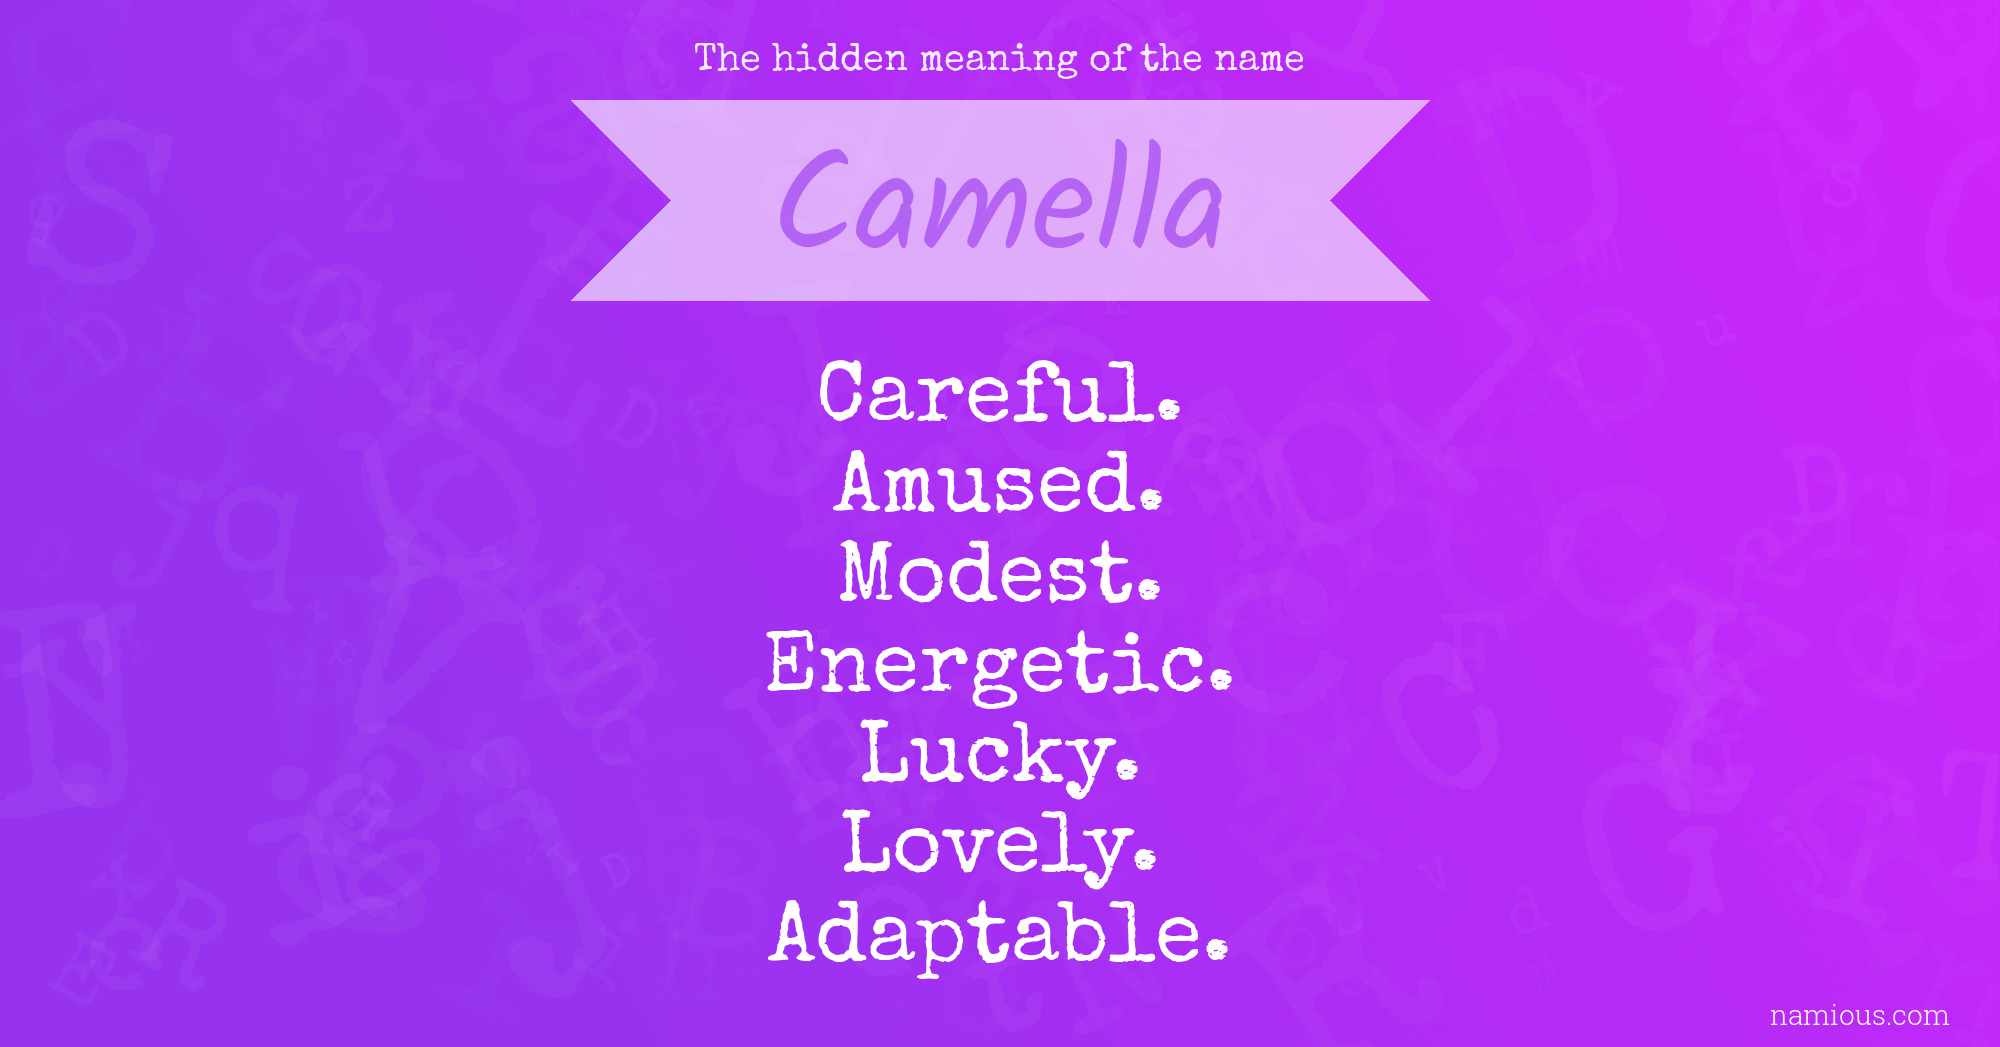 The hidden meaning of the name Camella